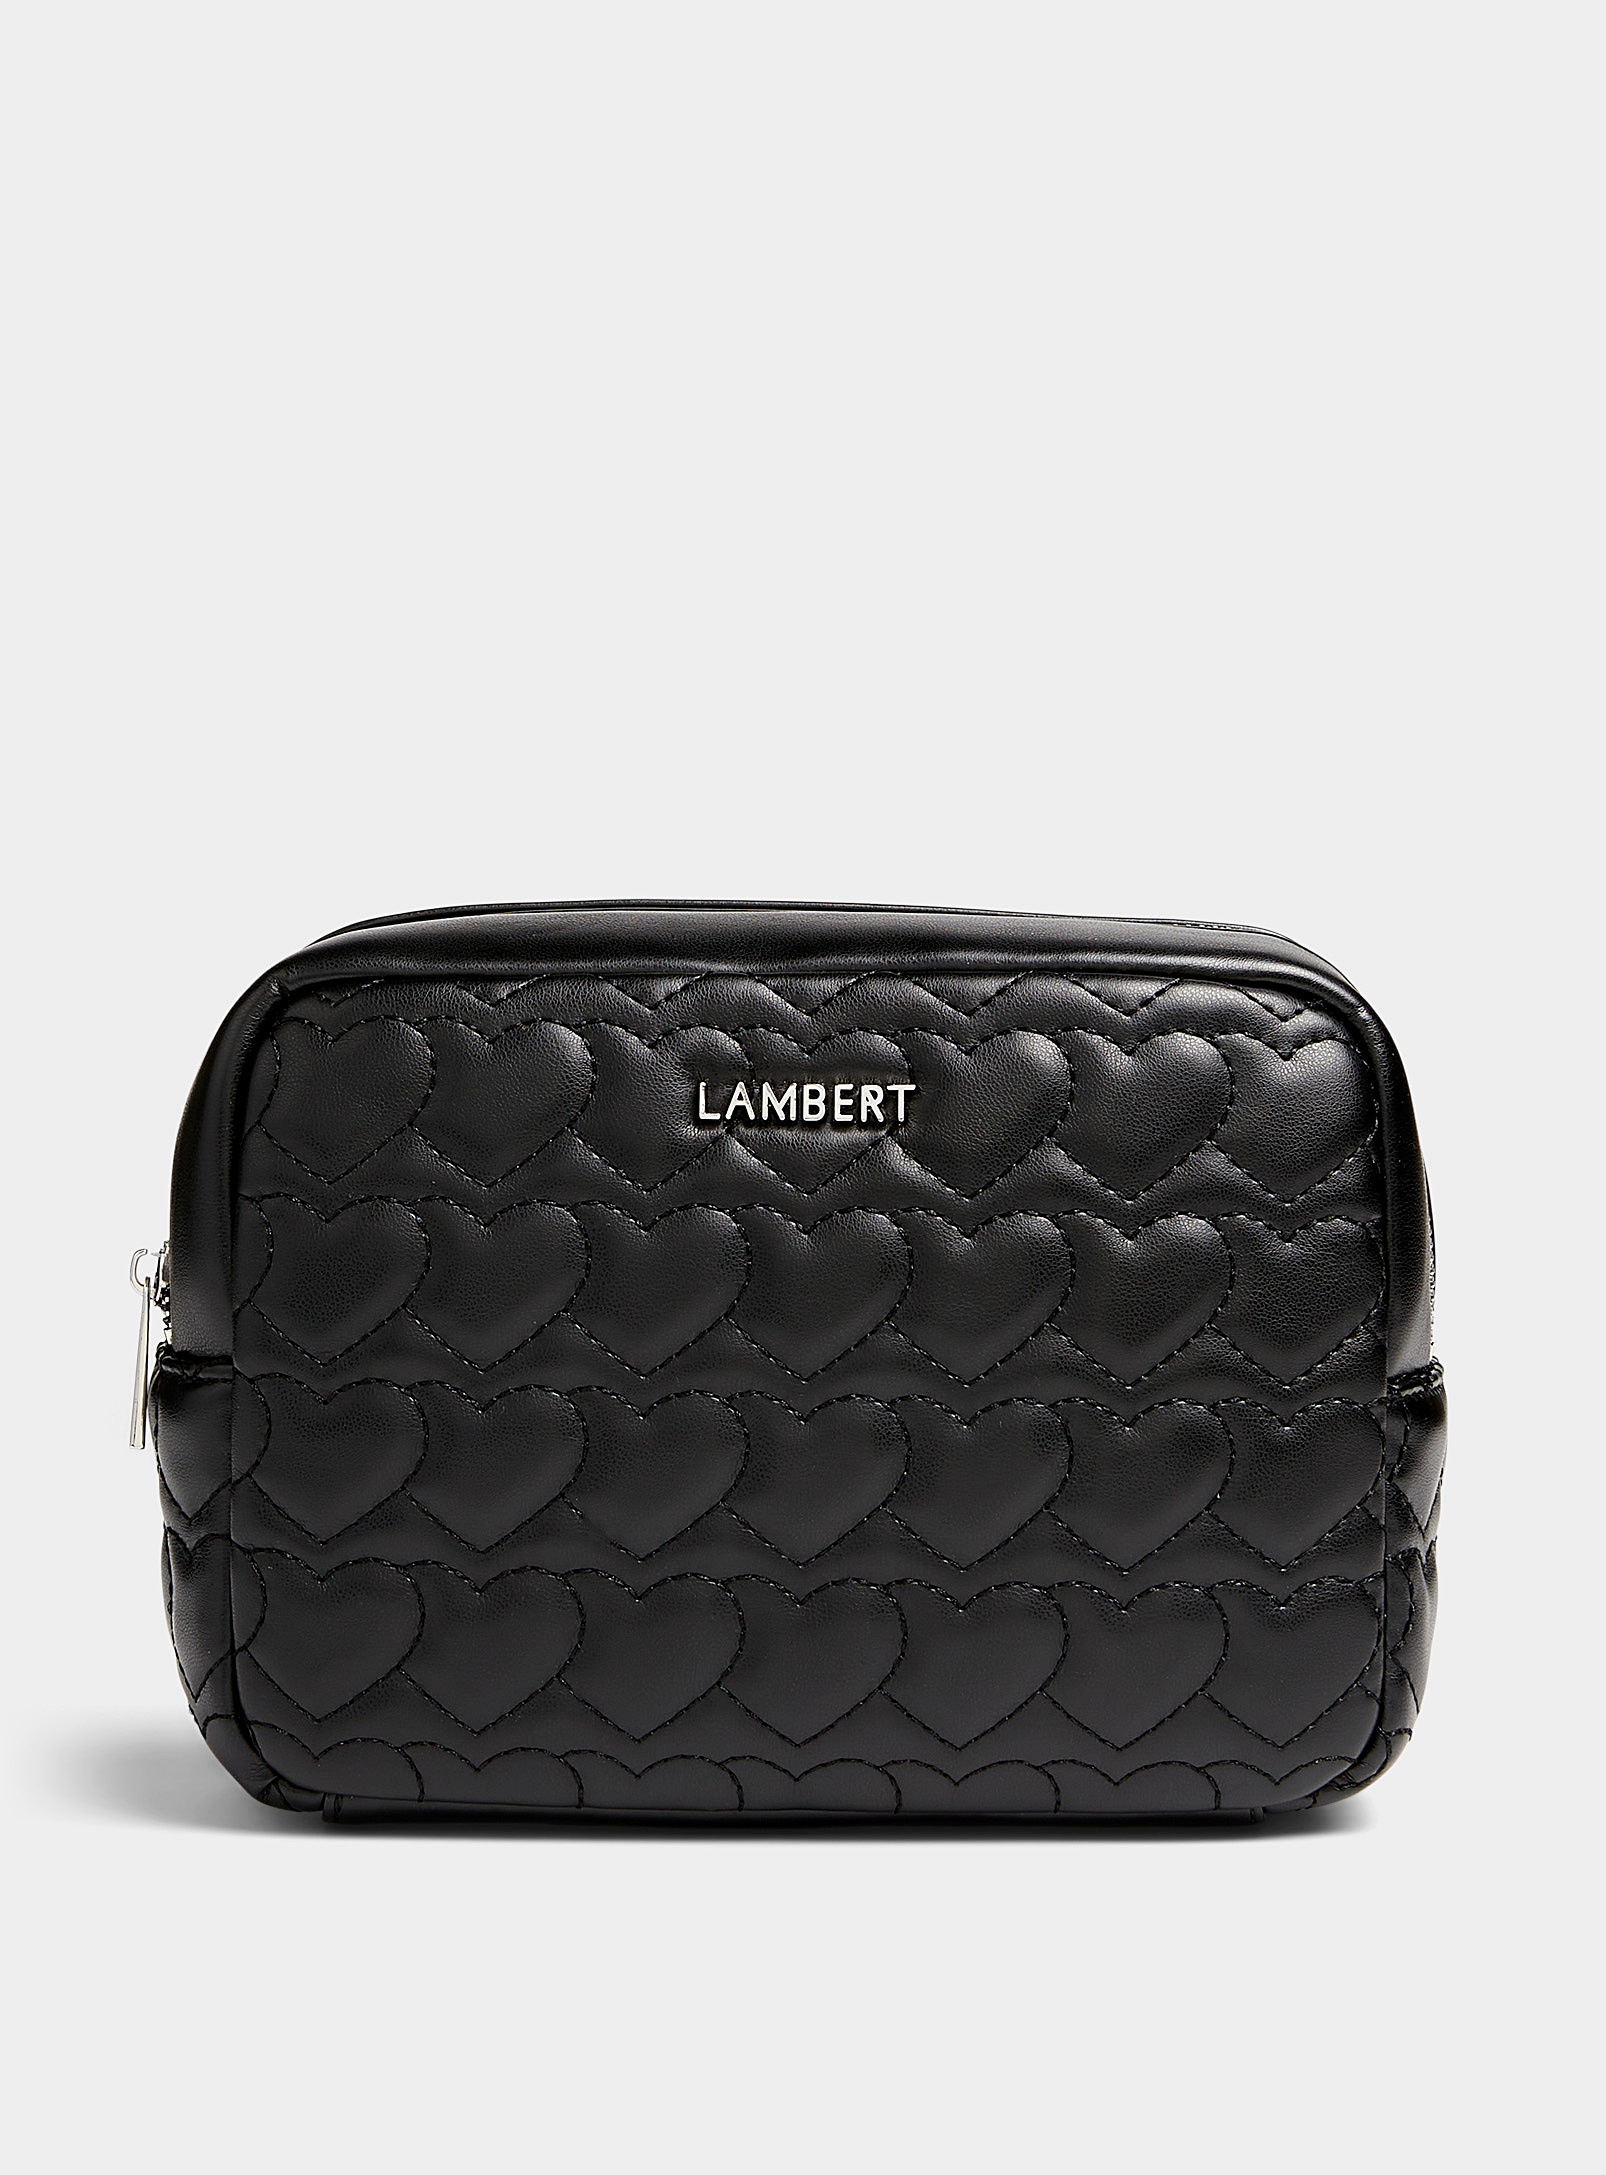 Lambert Rosie Topstitched Hearts Cosmetic Case In Black